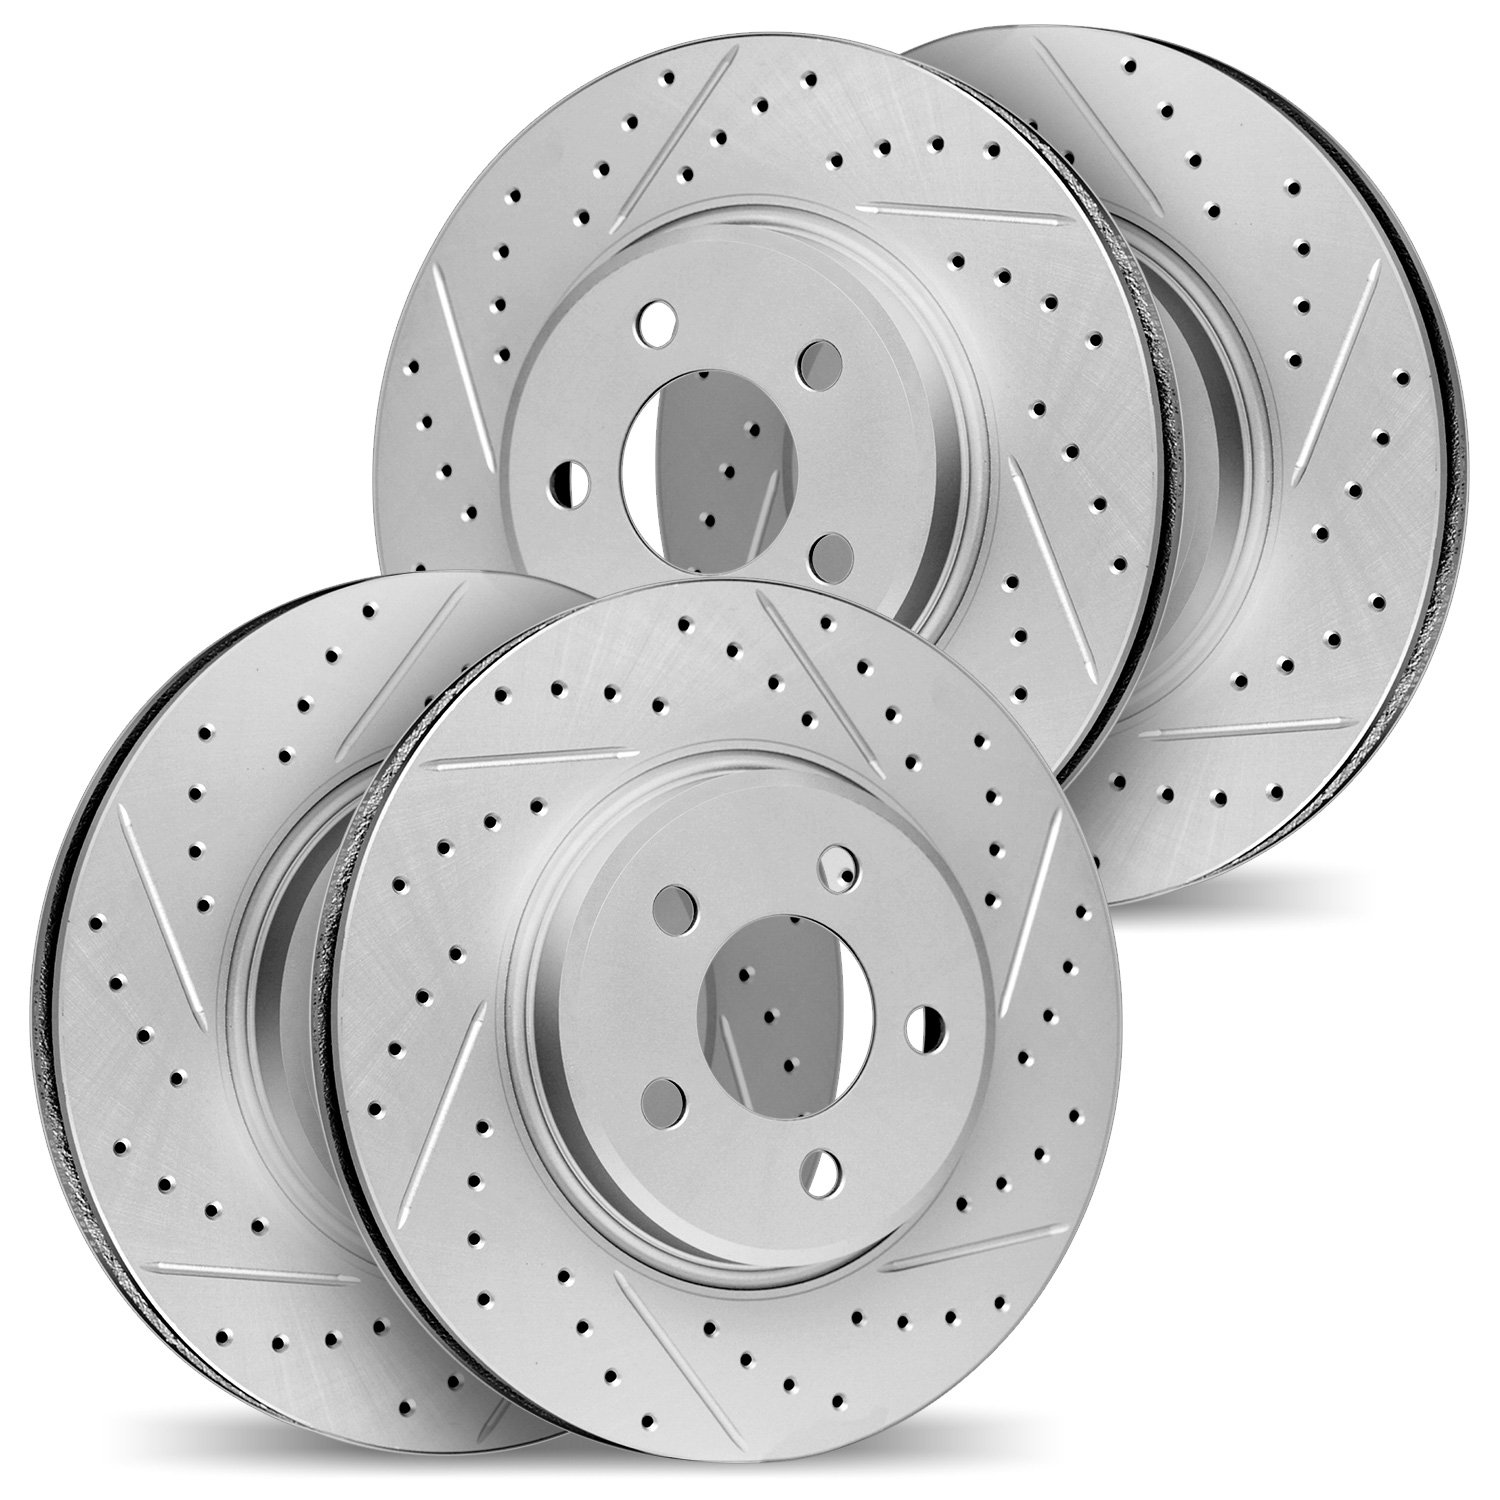 2004-13036 Geoperformance Drilled/Slotted Brake Rotors, 2015-2021 Subaru, Position: Front and Rear